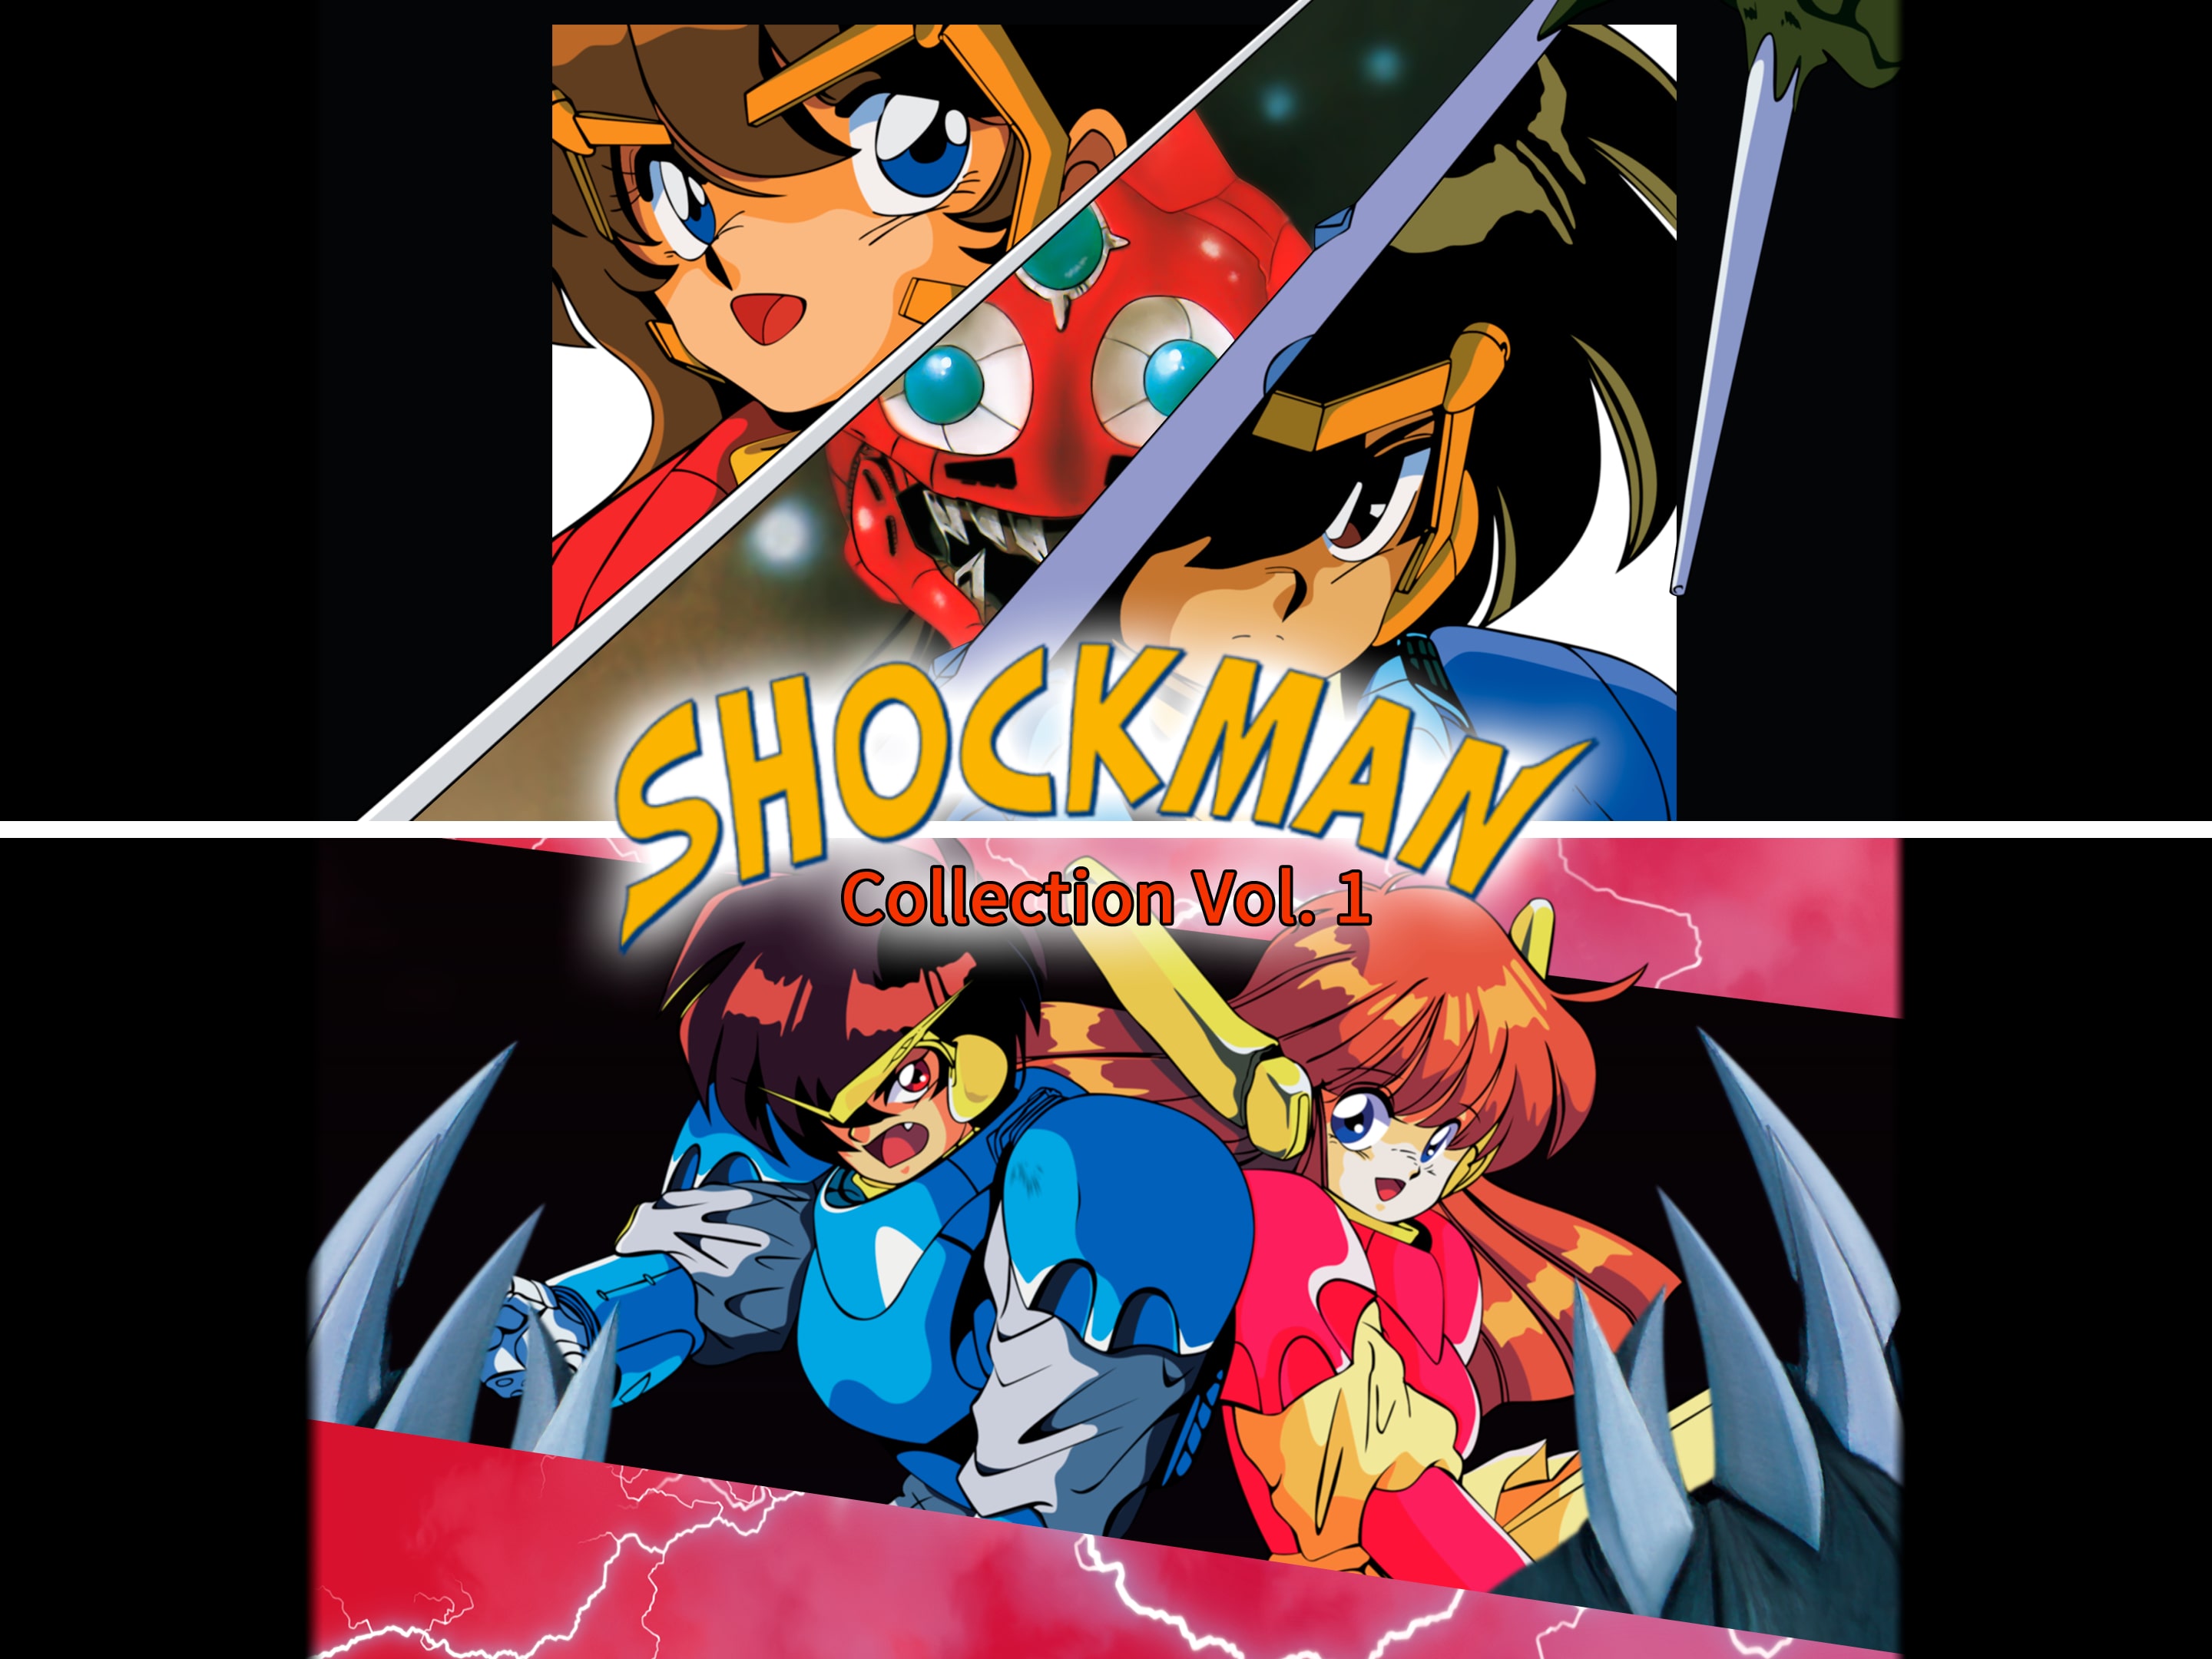 Shockman Collection Vol. 1 PS4® & PS5®